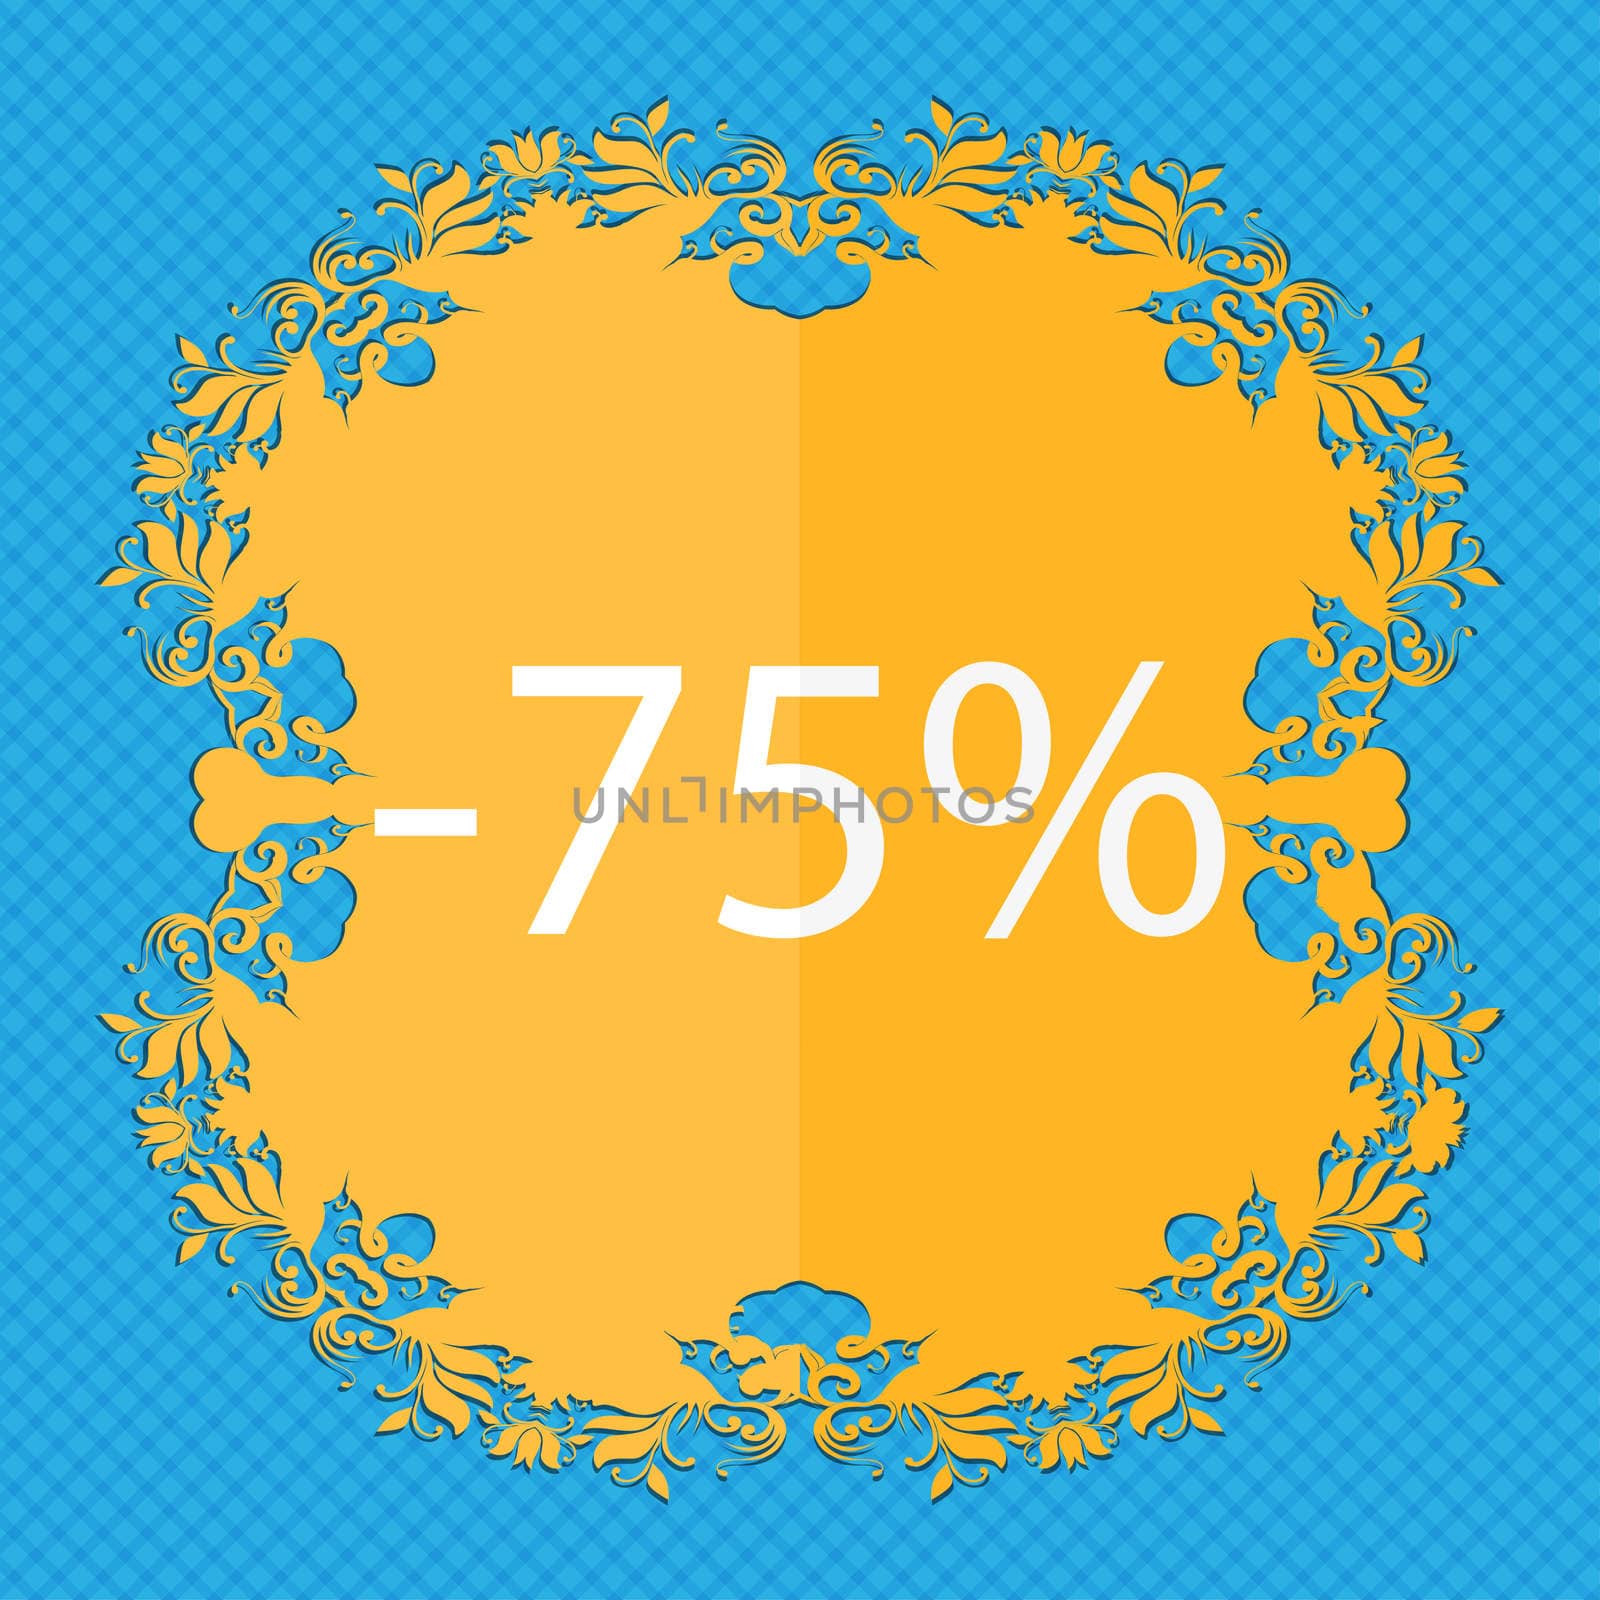 75 percent discount sign icon. Sale symbol. Special offer label. Floral flat design on a blue abstract background with place for your text. illustration